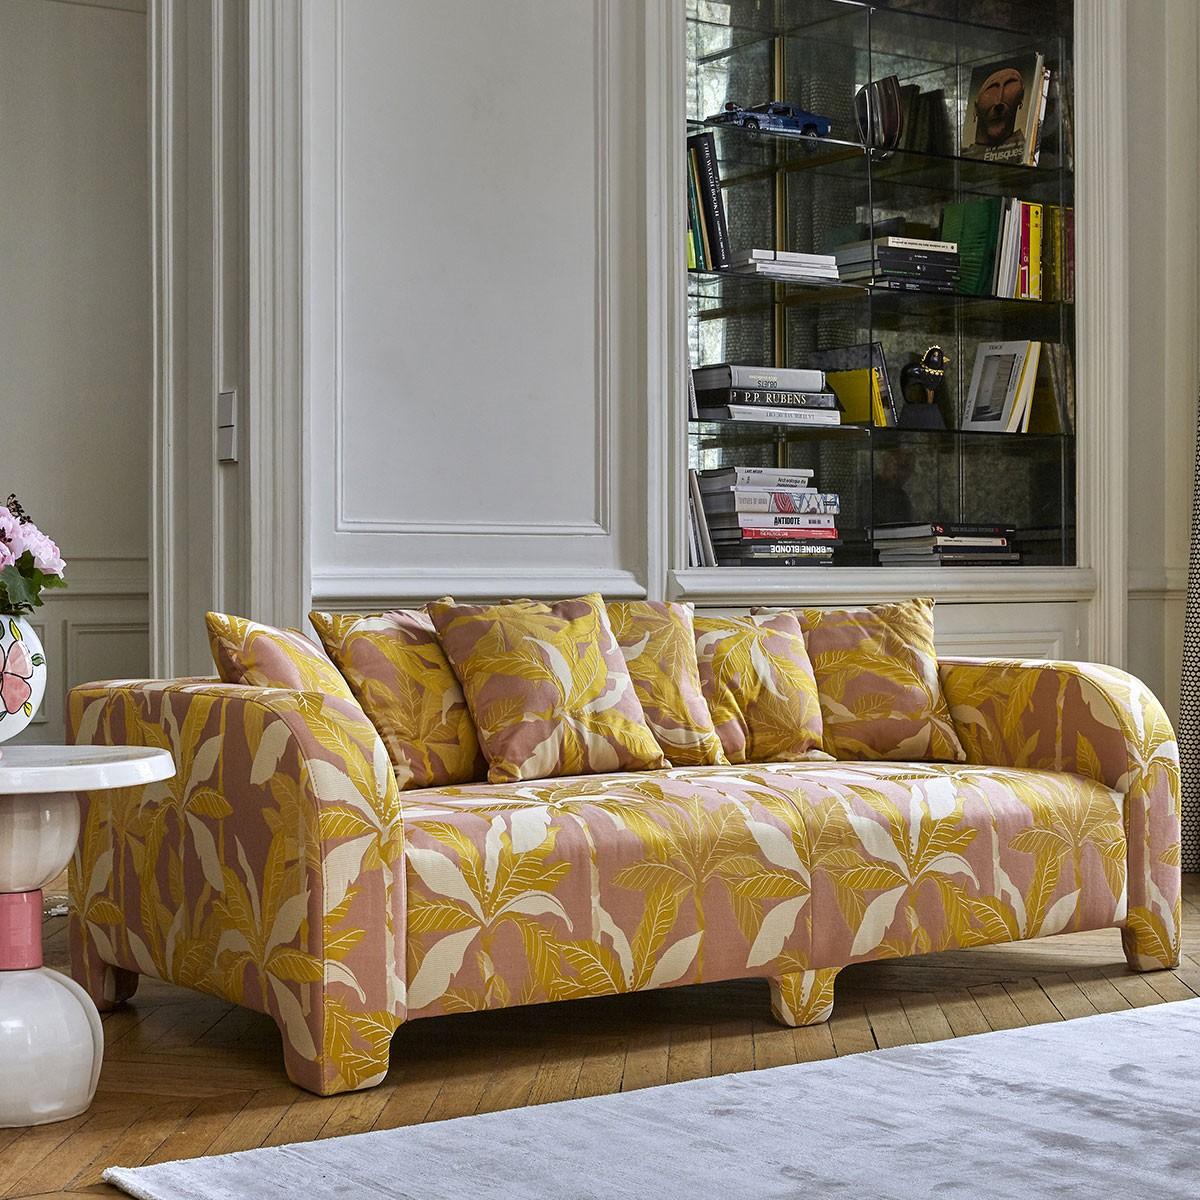 Popus editions graziella 2 seater sofa in pink como velvet upholstery.

A foot that hides another. A cushion that hides another. A curve that hides another with contemporary lines and a base like a punctuation mark, this sofa gives pride of place